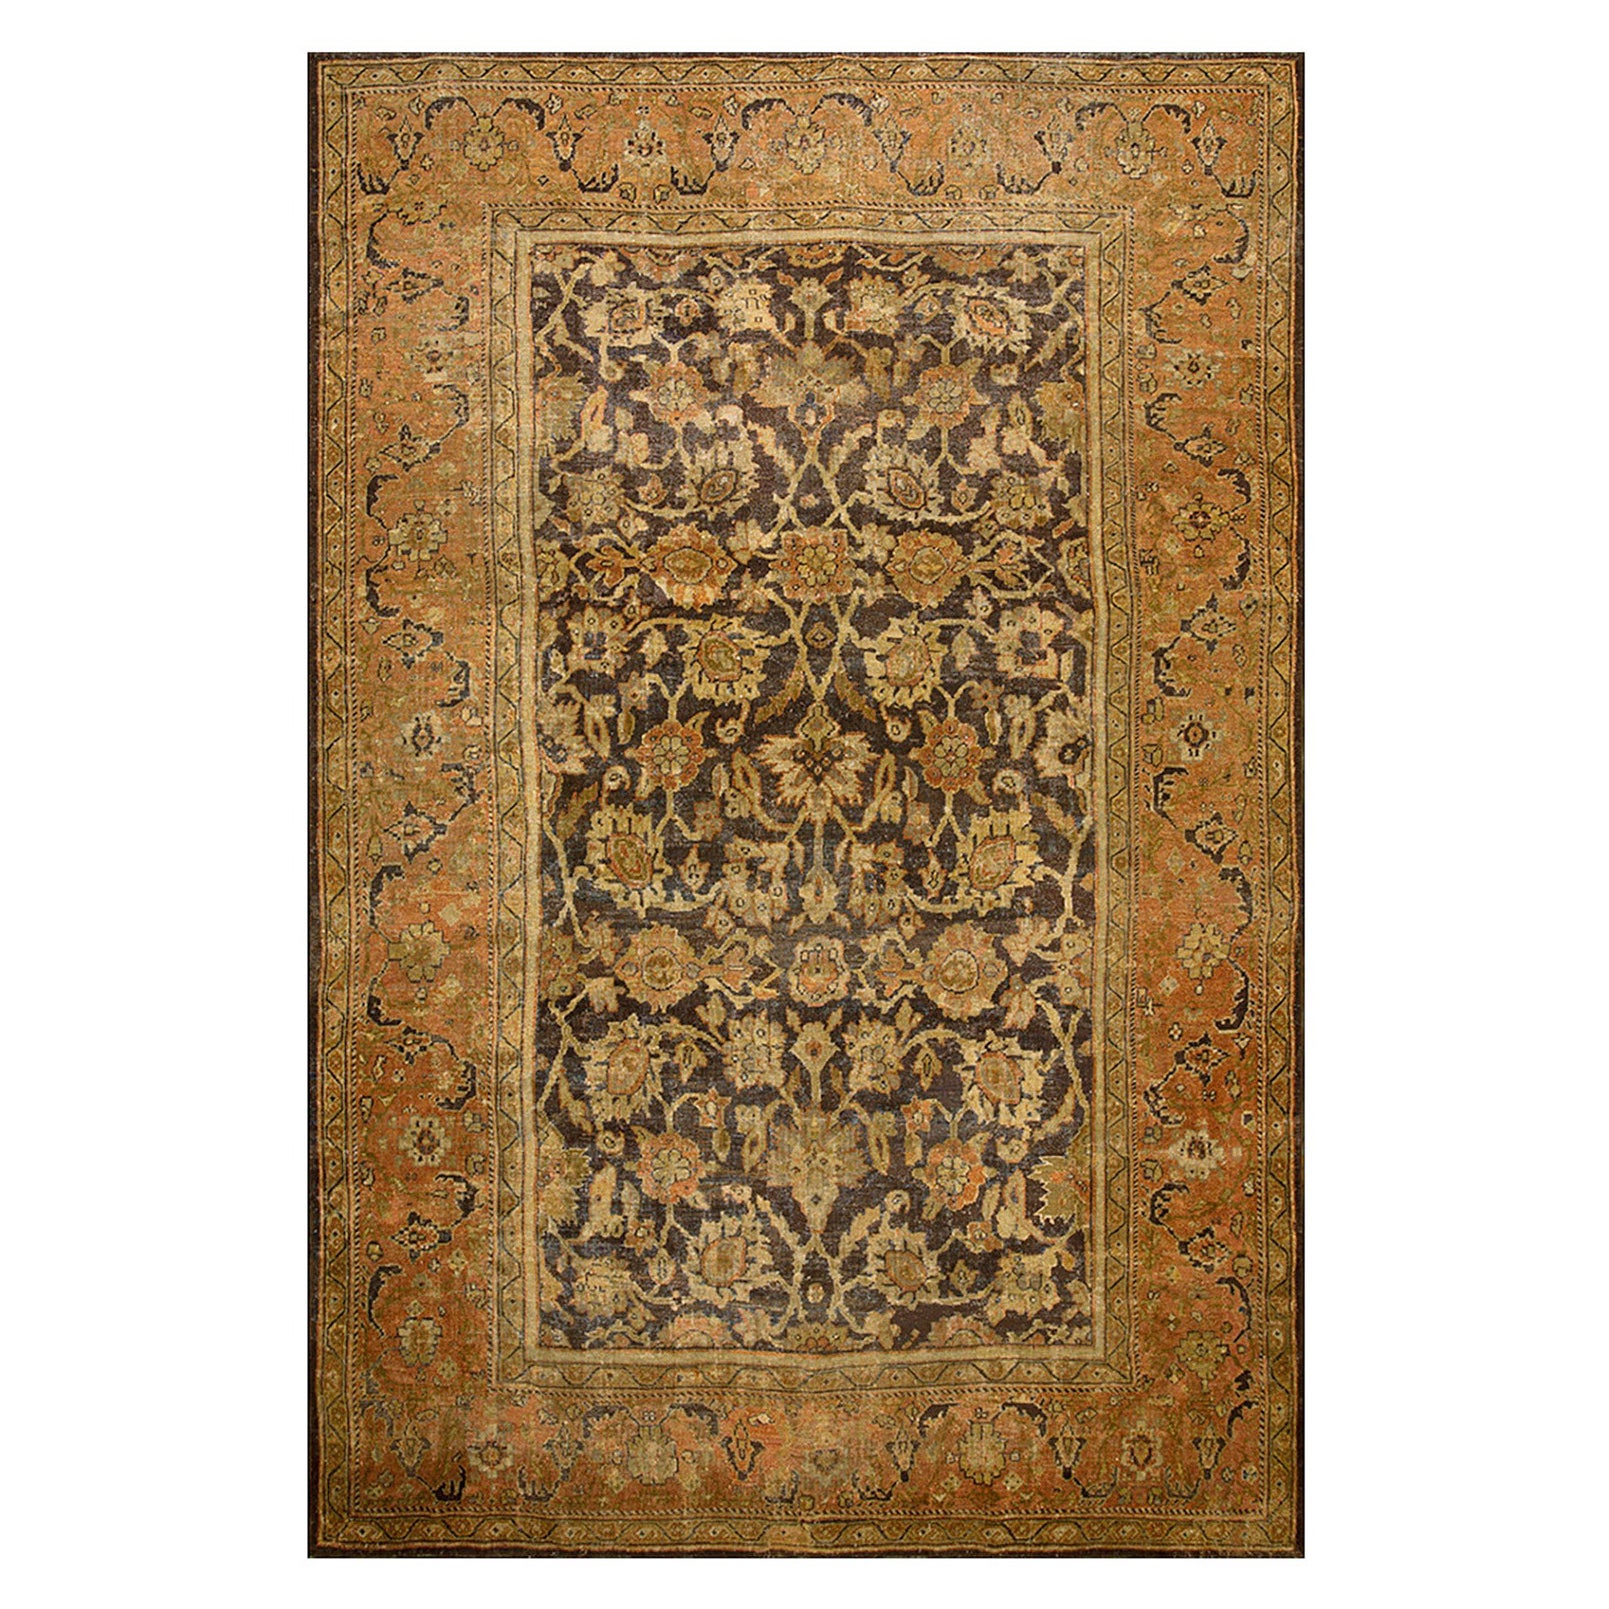 Late 19th Century  Persian Sultanabad Carpet ( 9' x 13' 4'' - 275 x 405 )